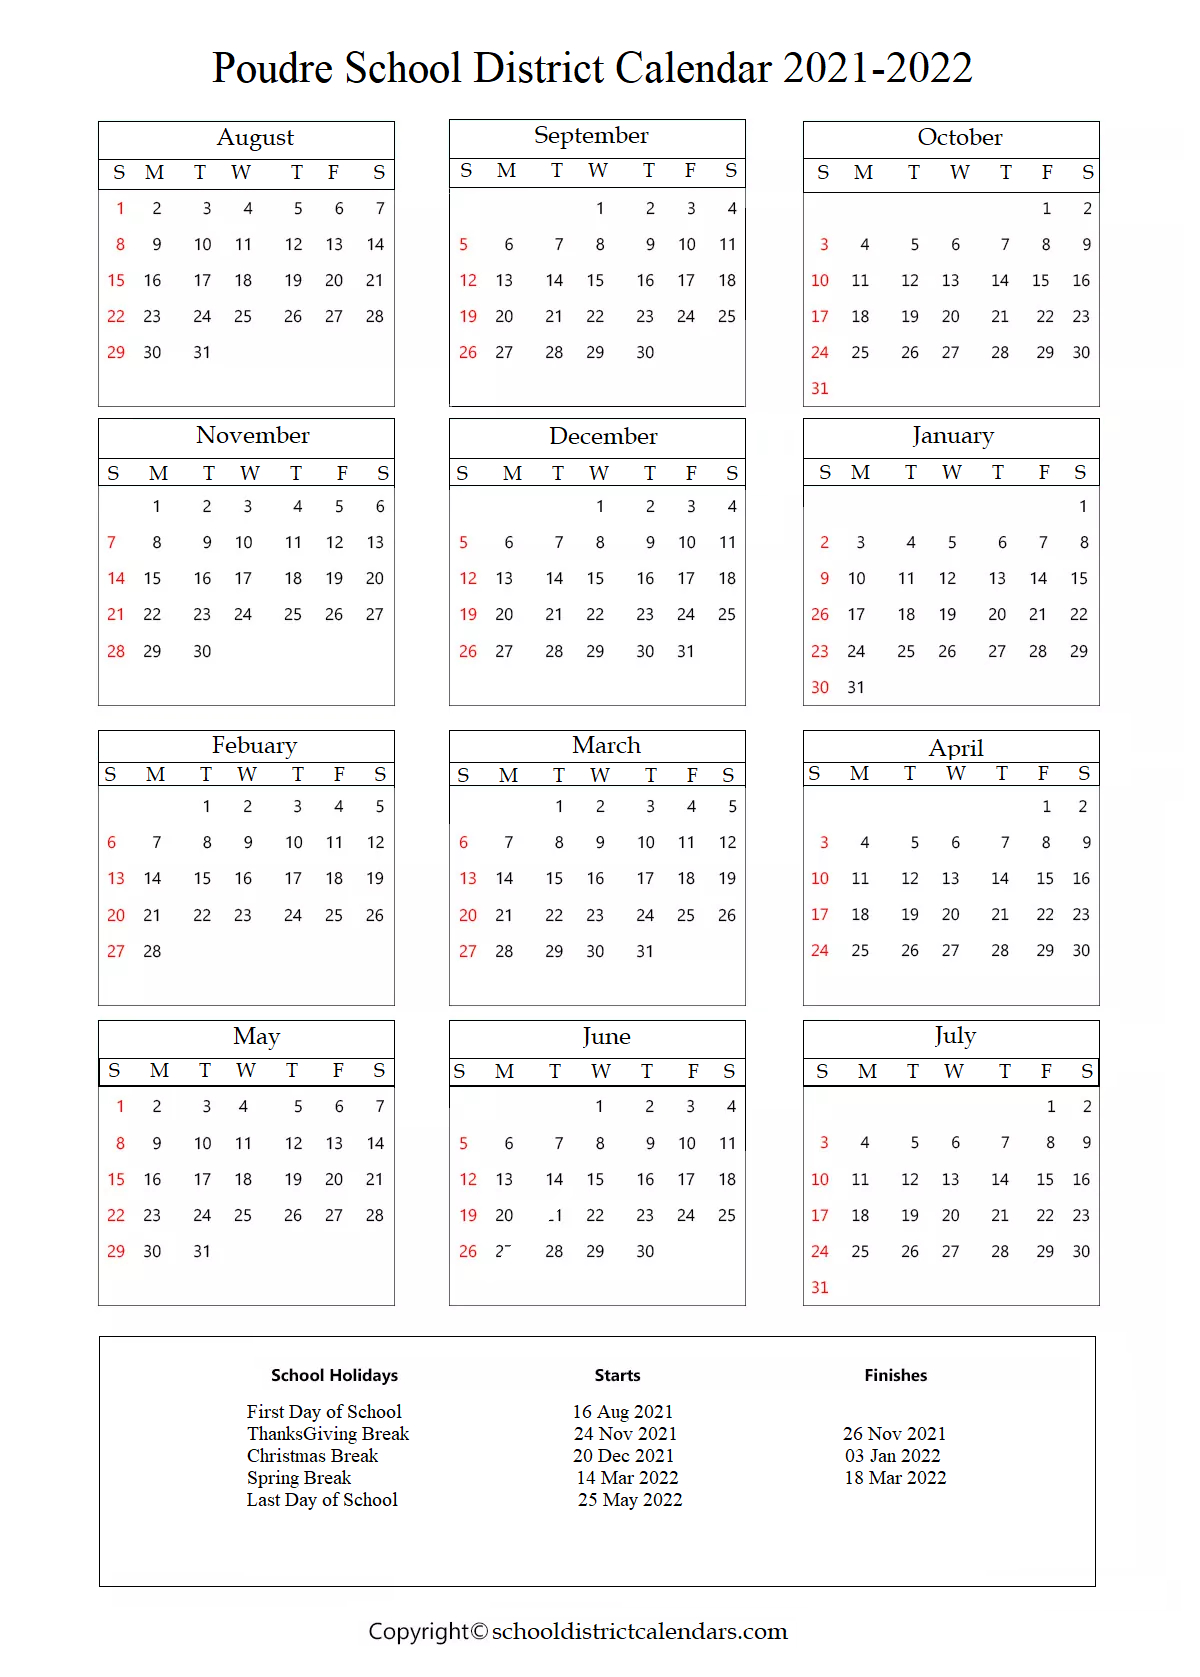 Poudre School District Calendar 2021-2022 With Holidays In Pdf | School-2021 And 2022 School Calendar Pdf